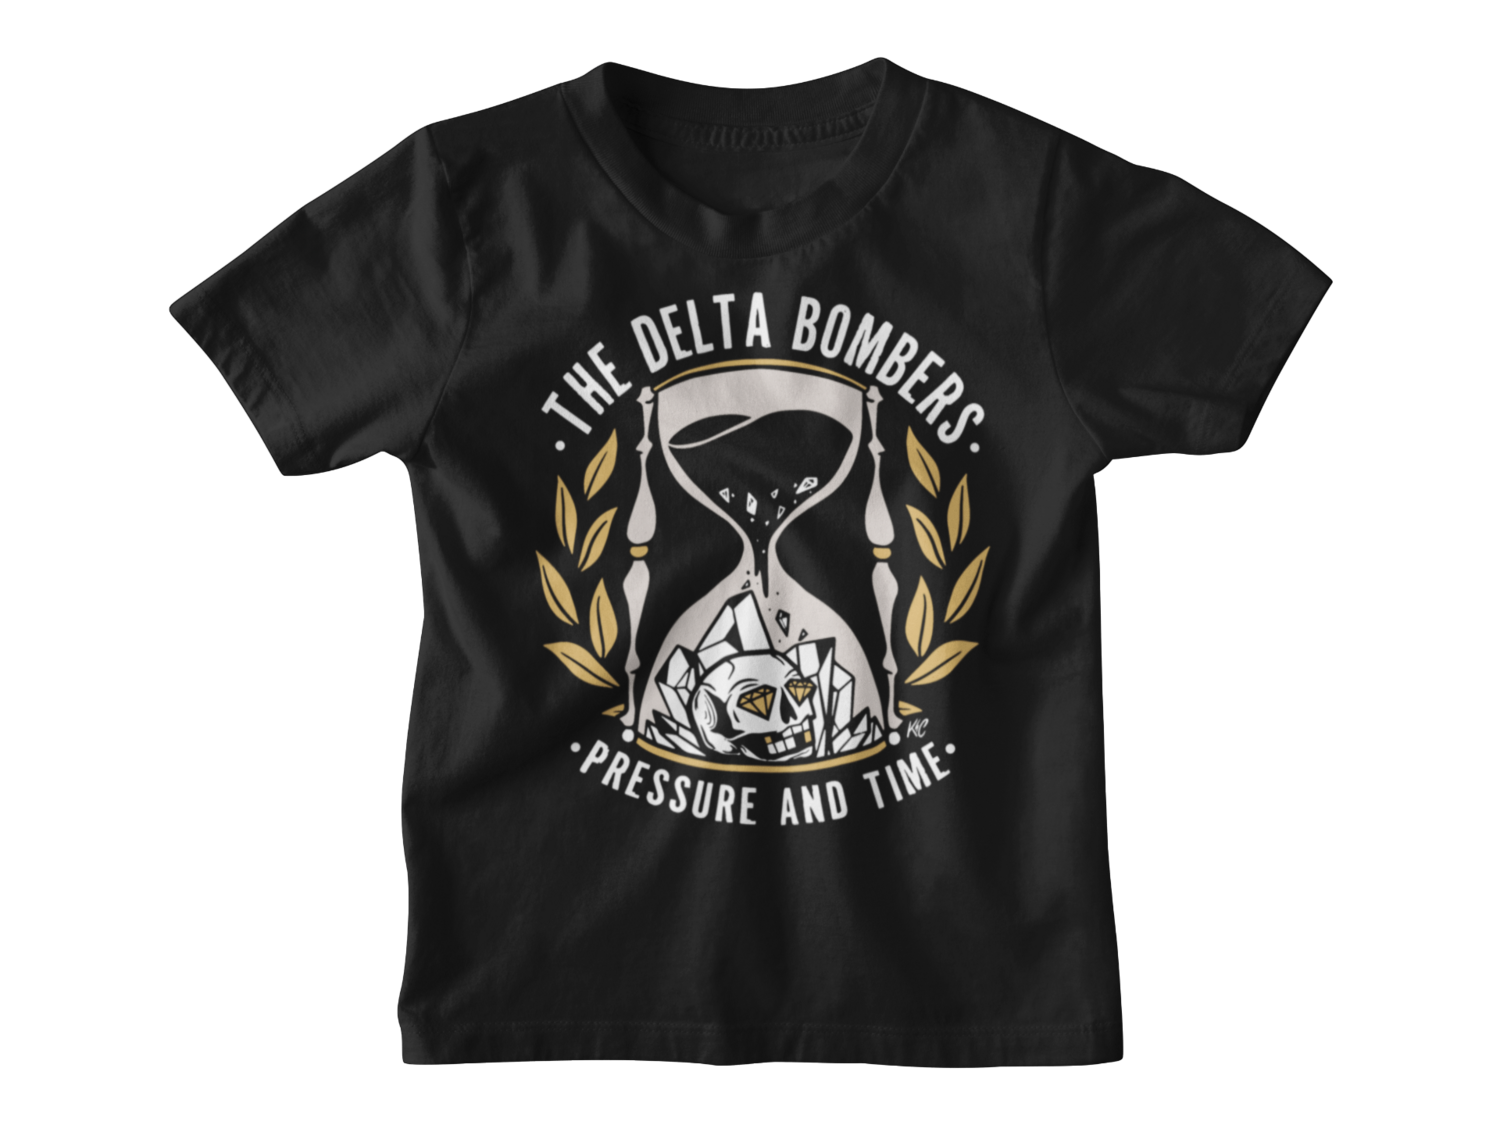 THE DELTA BOMBERS "Pressure and time" T-SHIRT KIDS